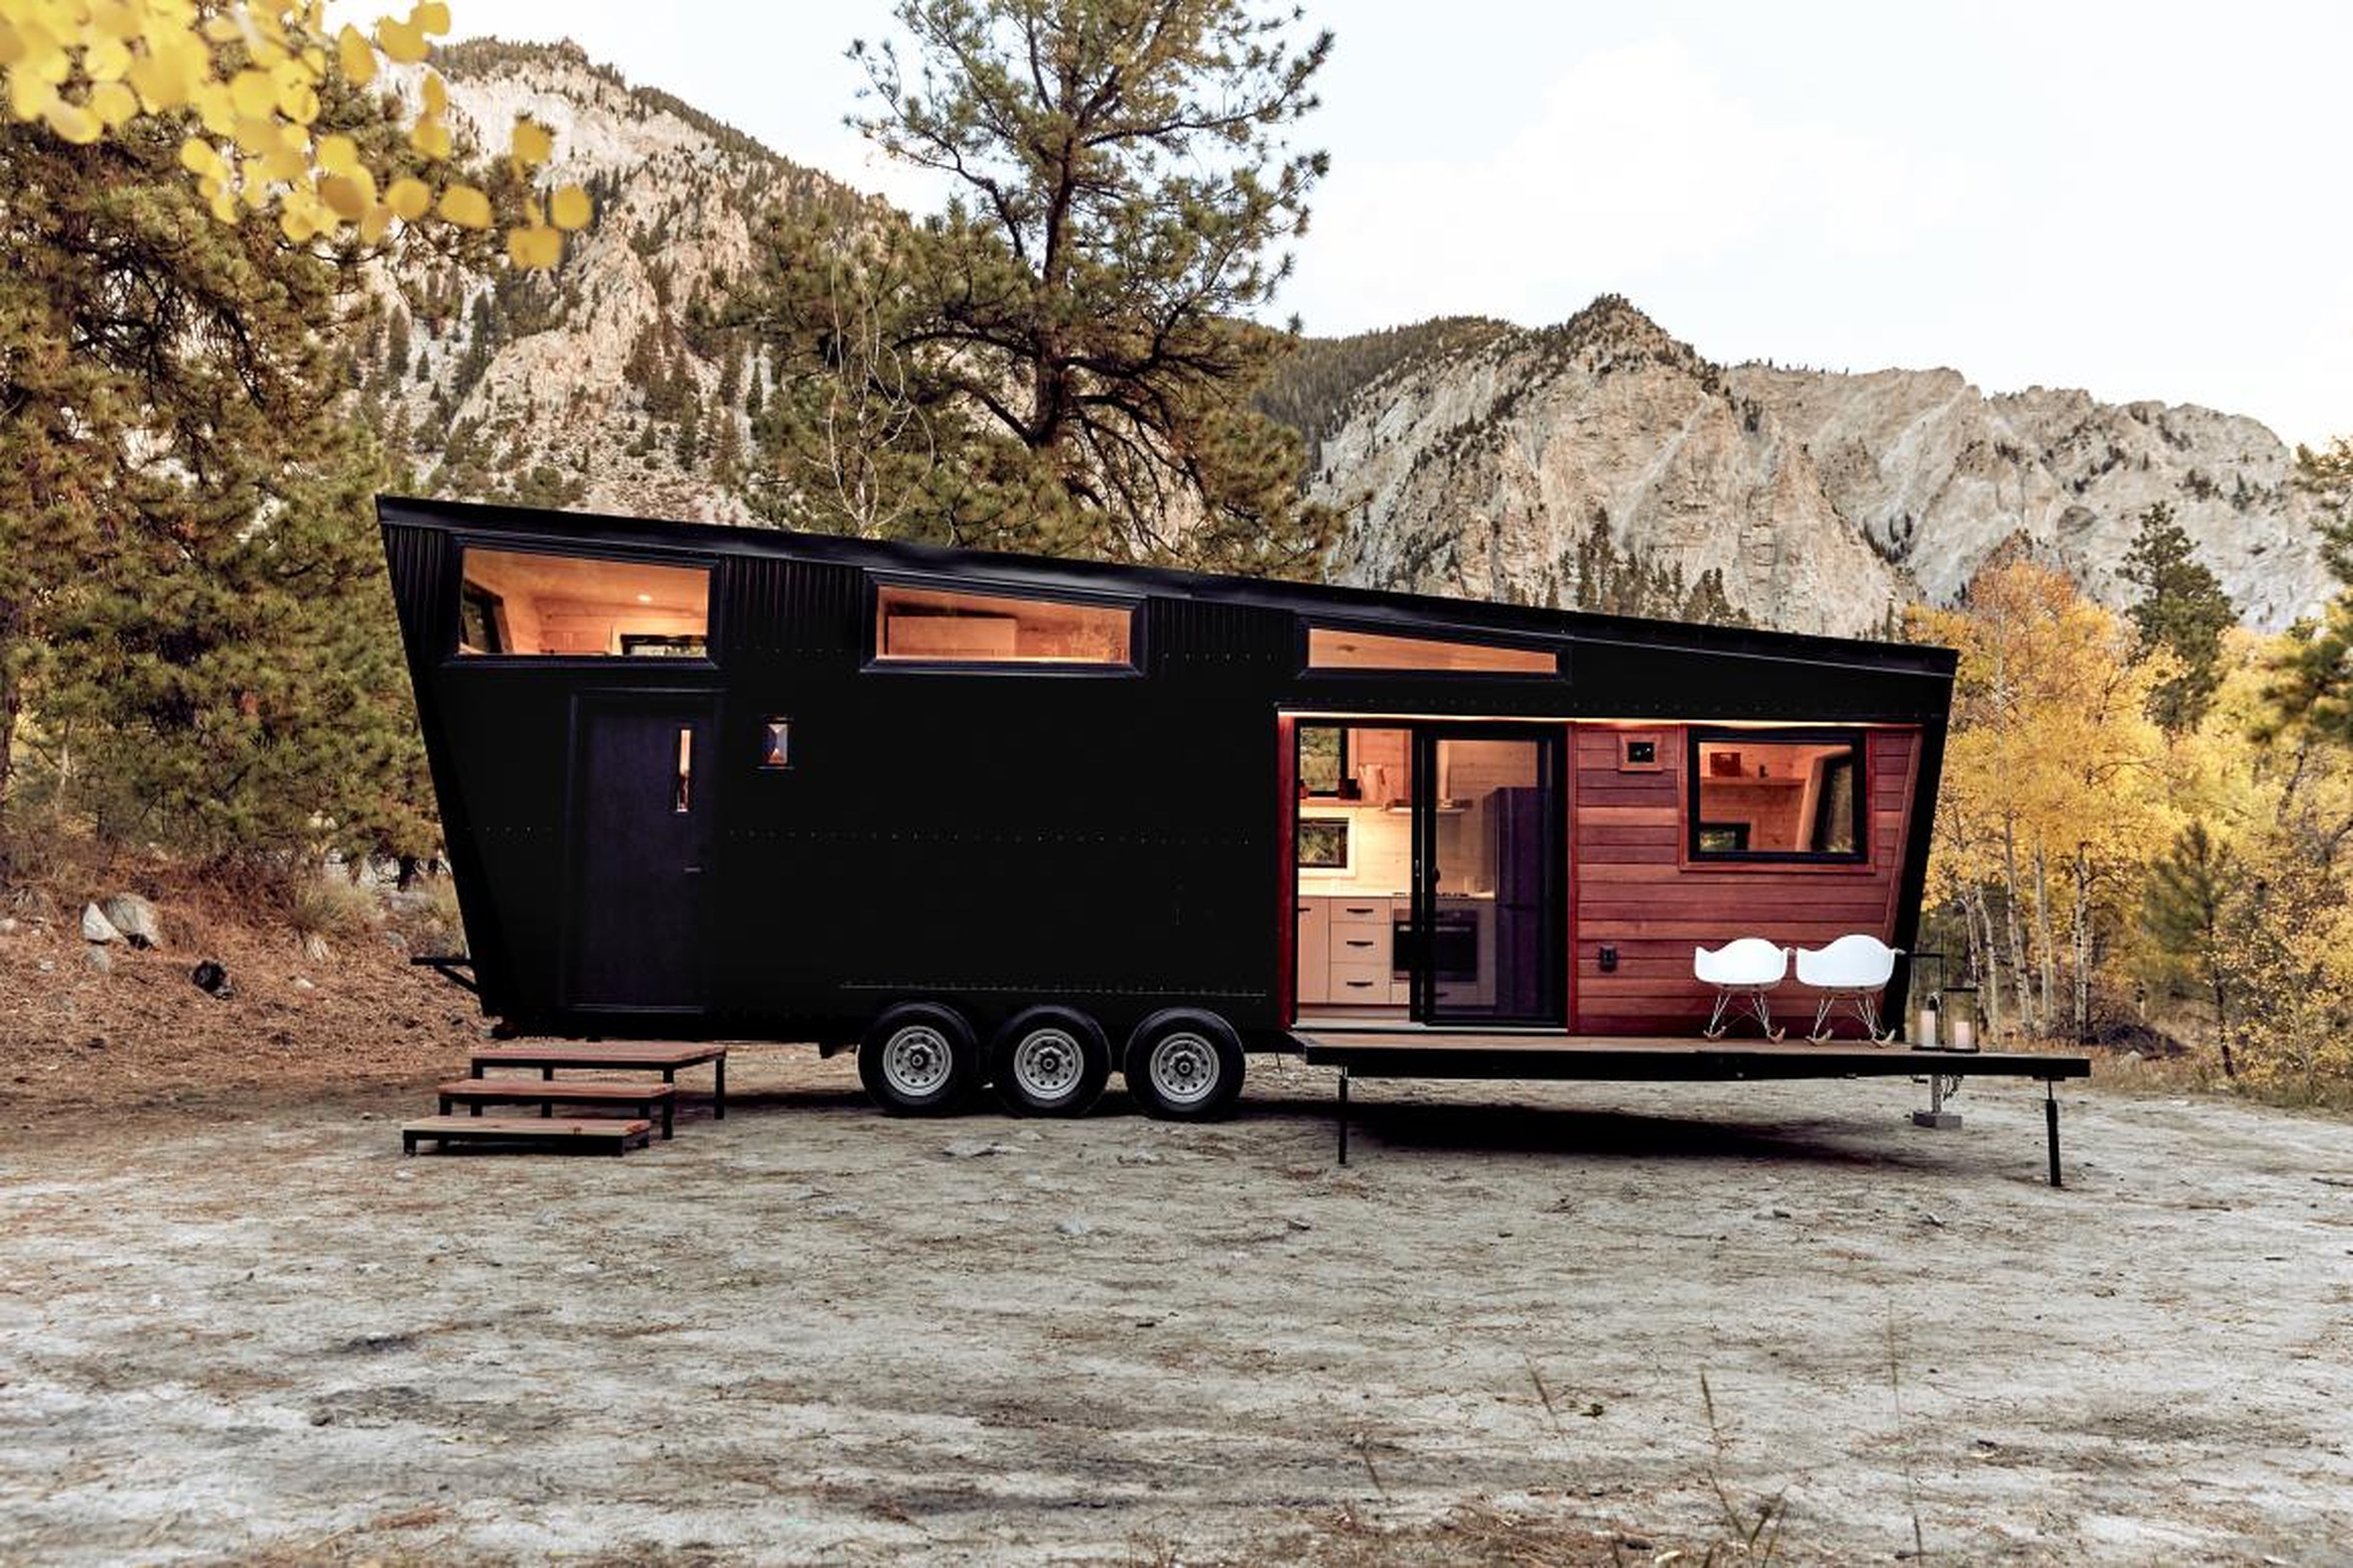 The design company Land Ark created a "Mad Men"-inspired RV.